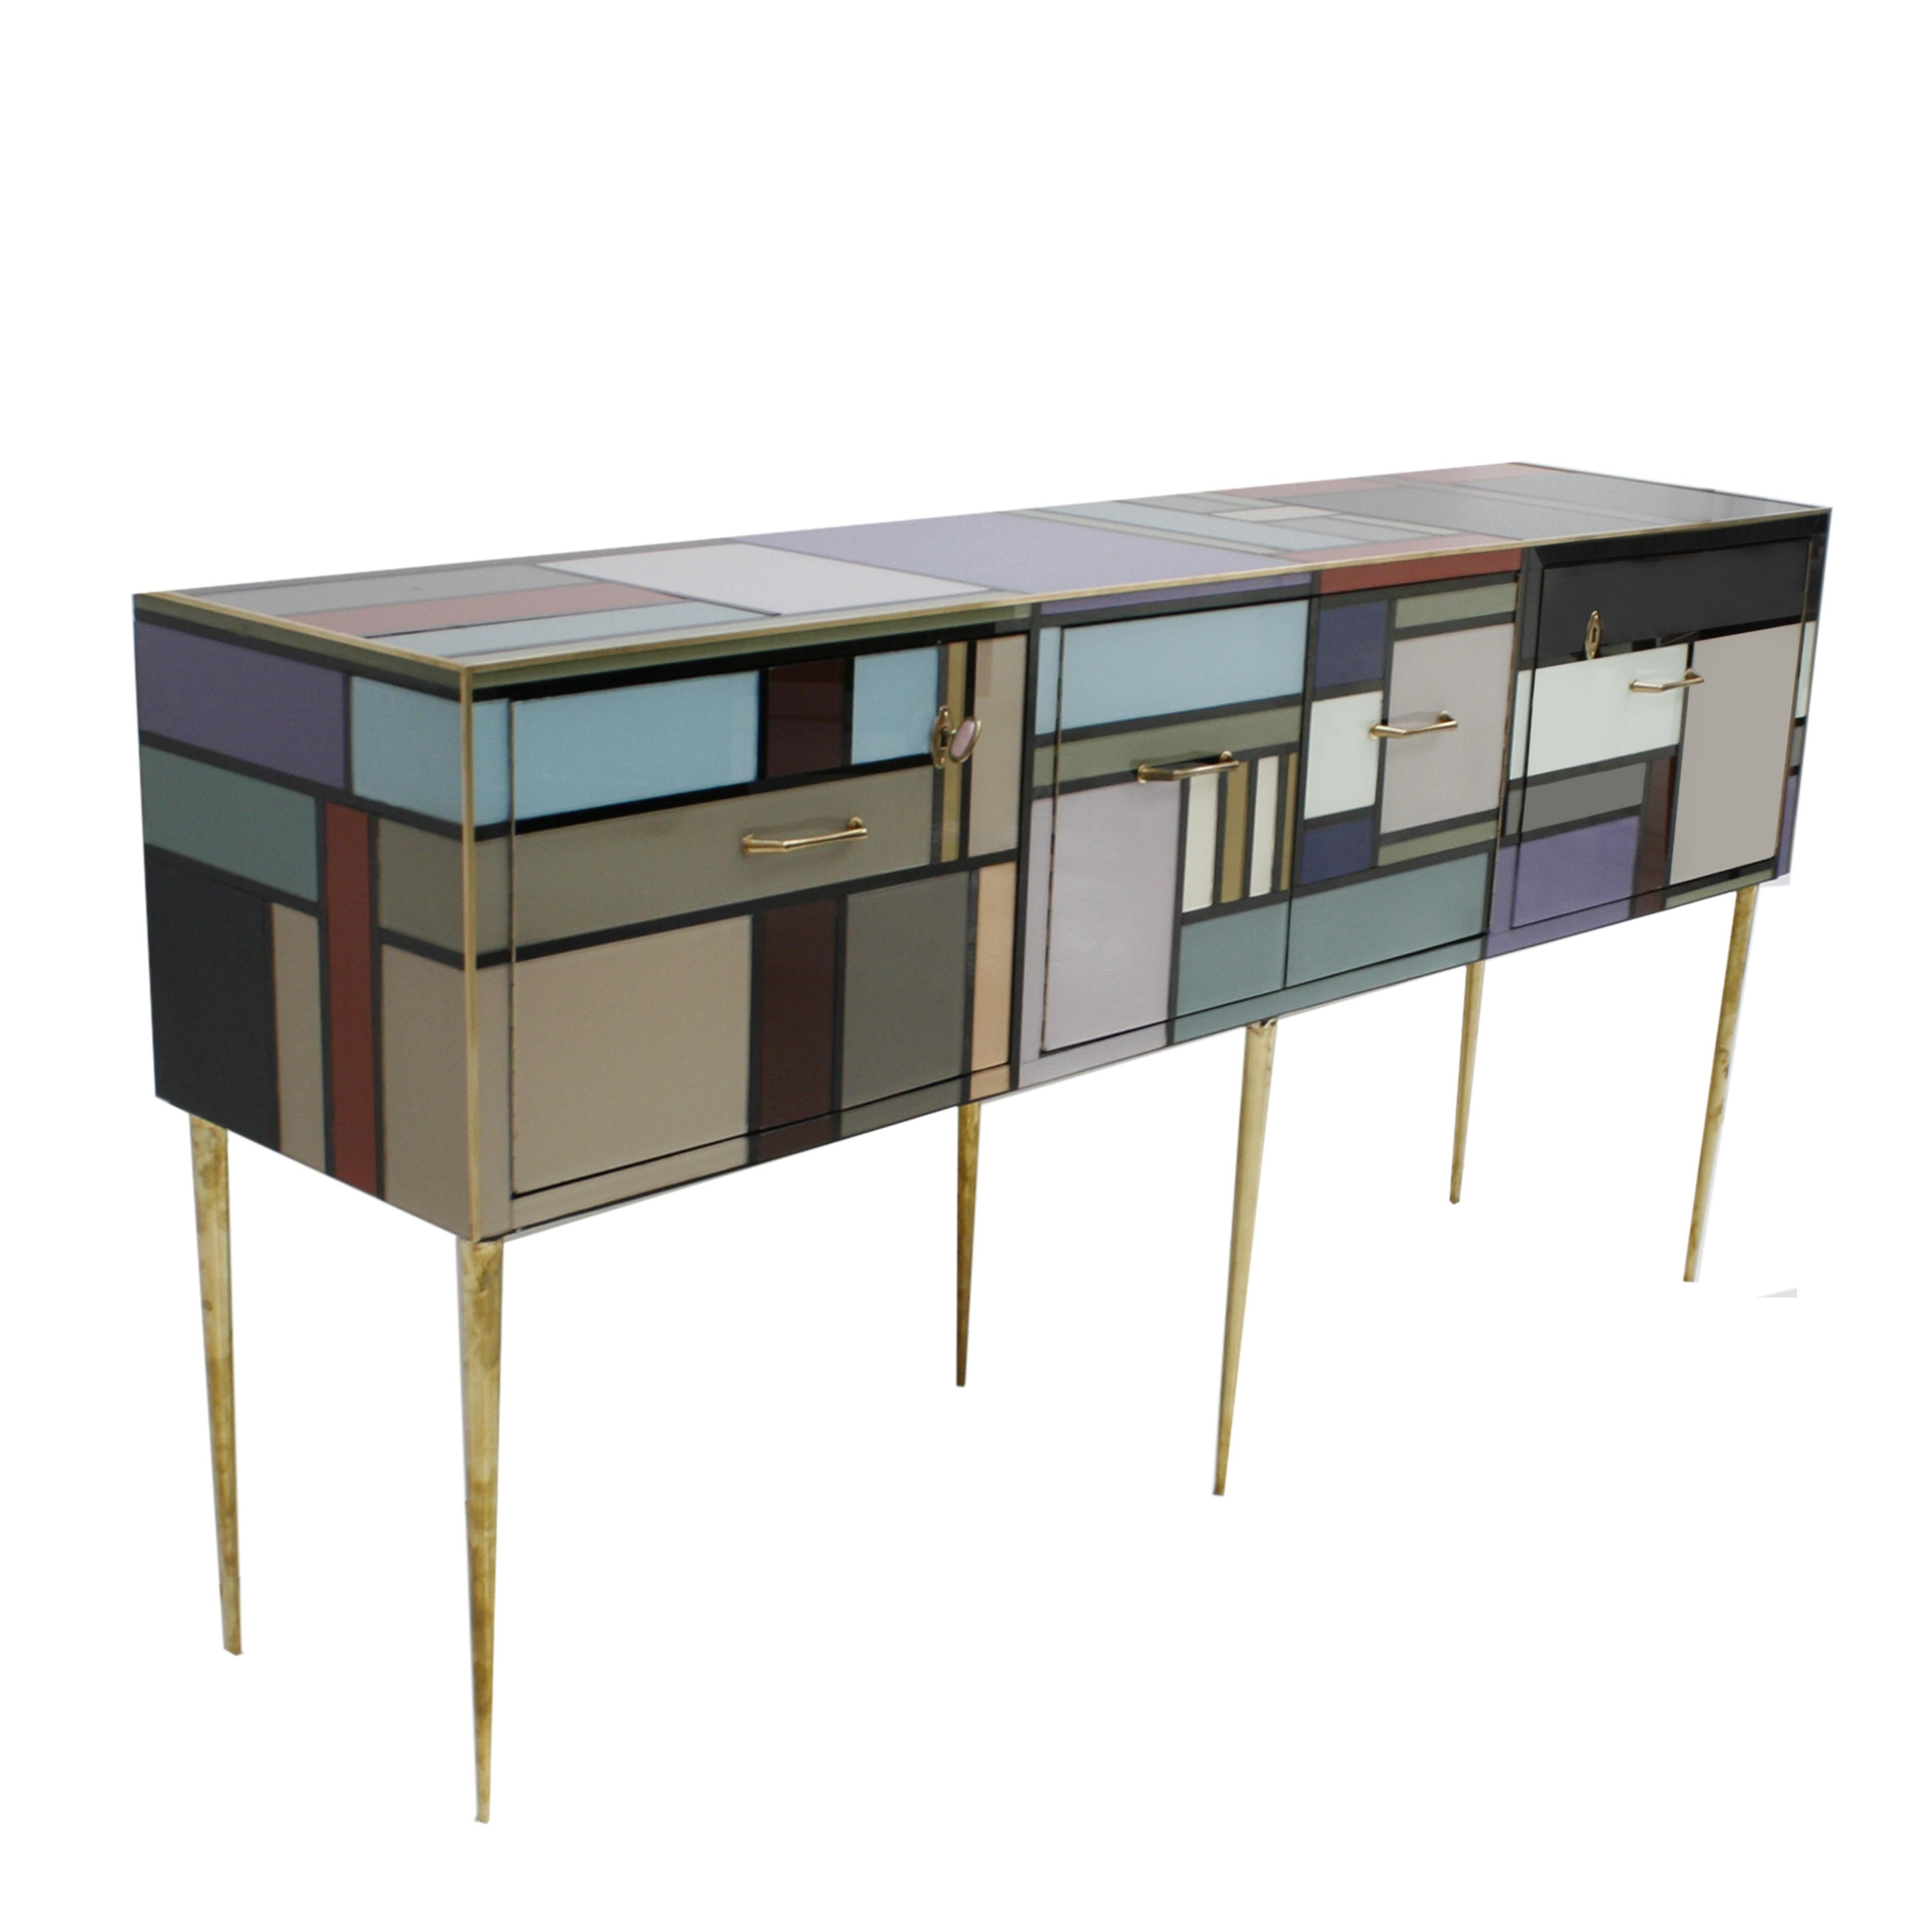 Italian L.A. Studio Sideboard with Four Doors Made in Colored Glass. Italy